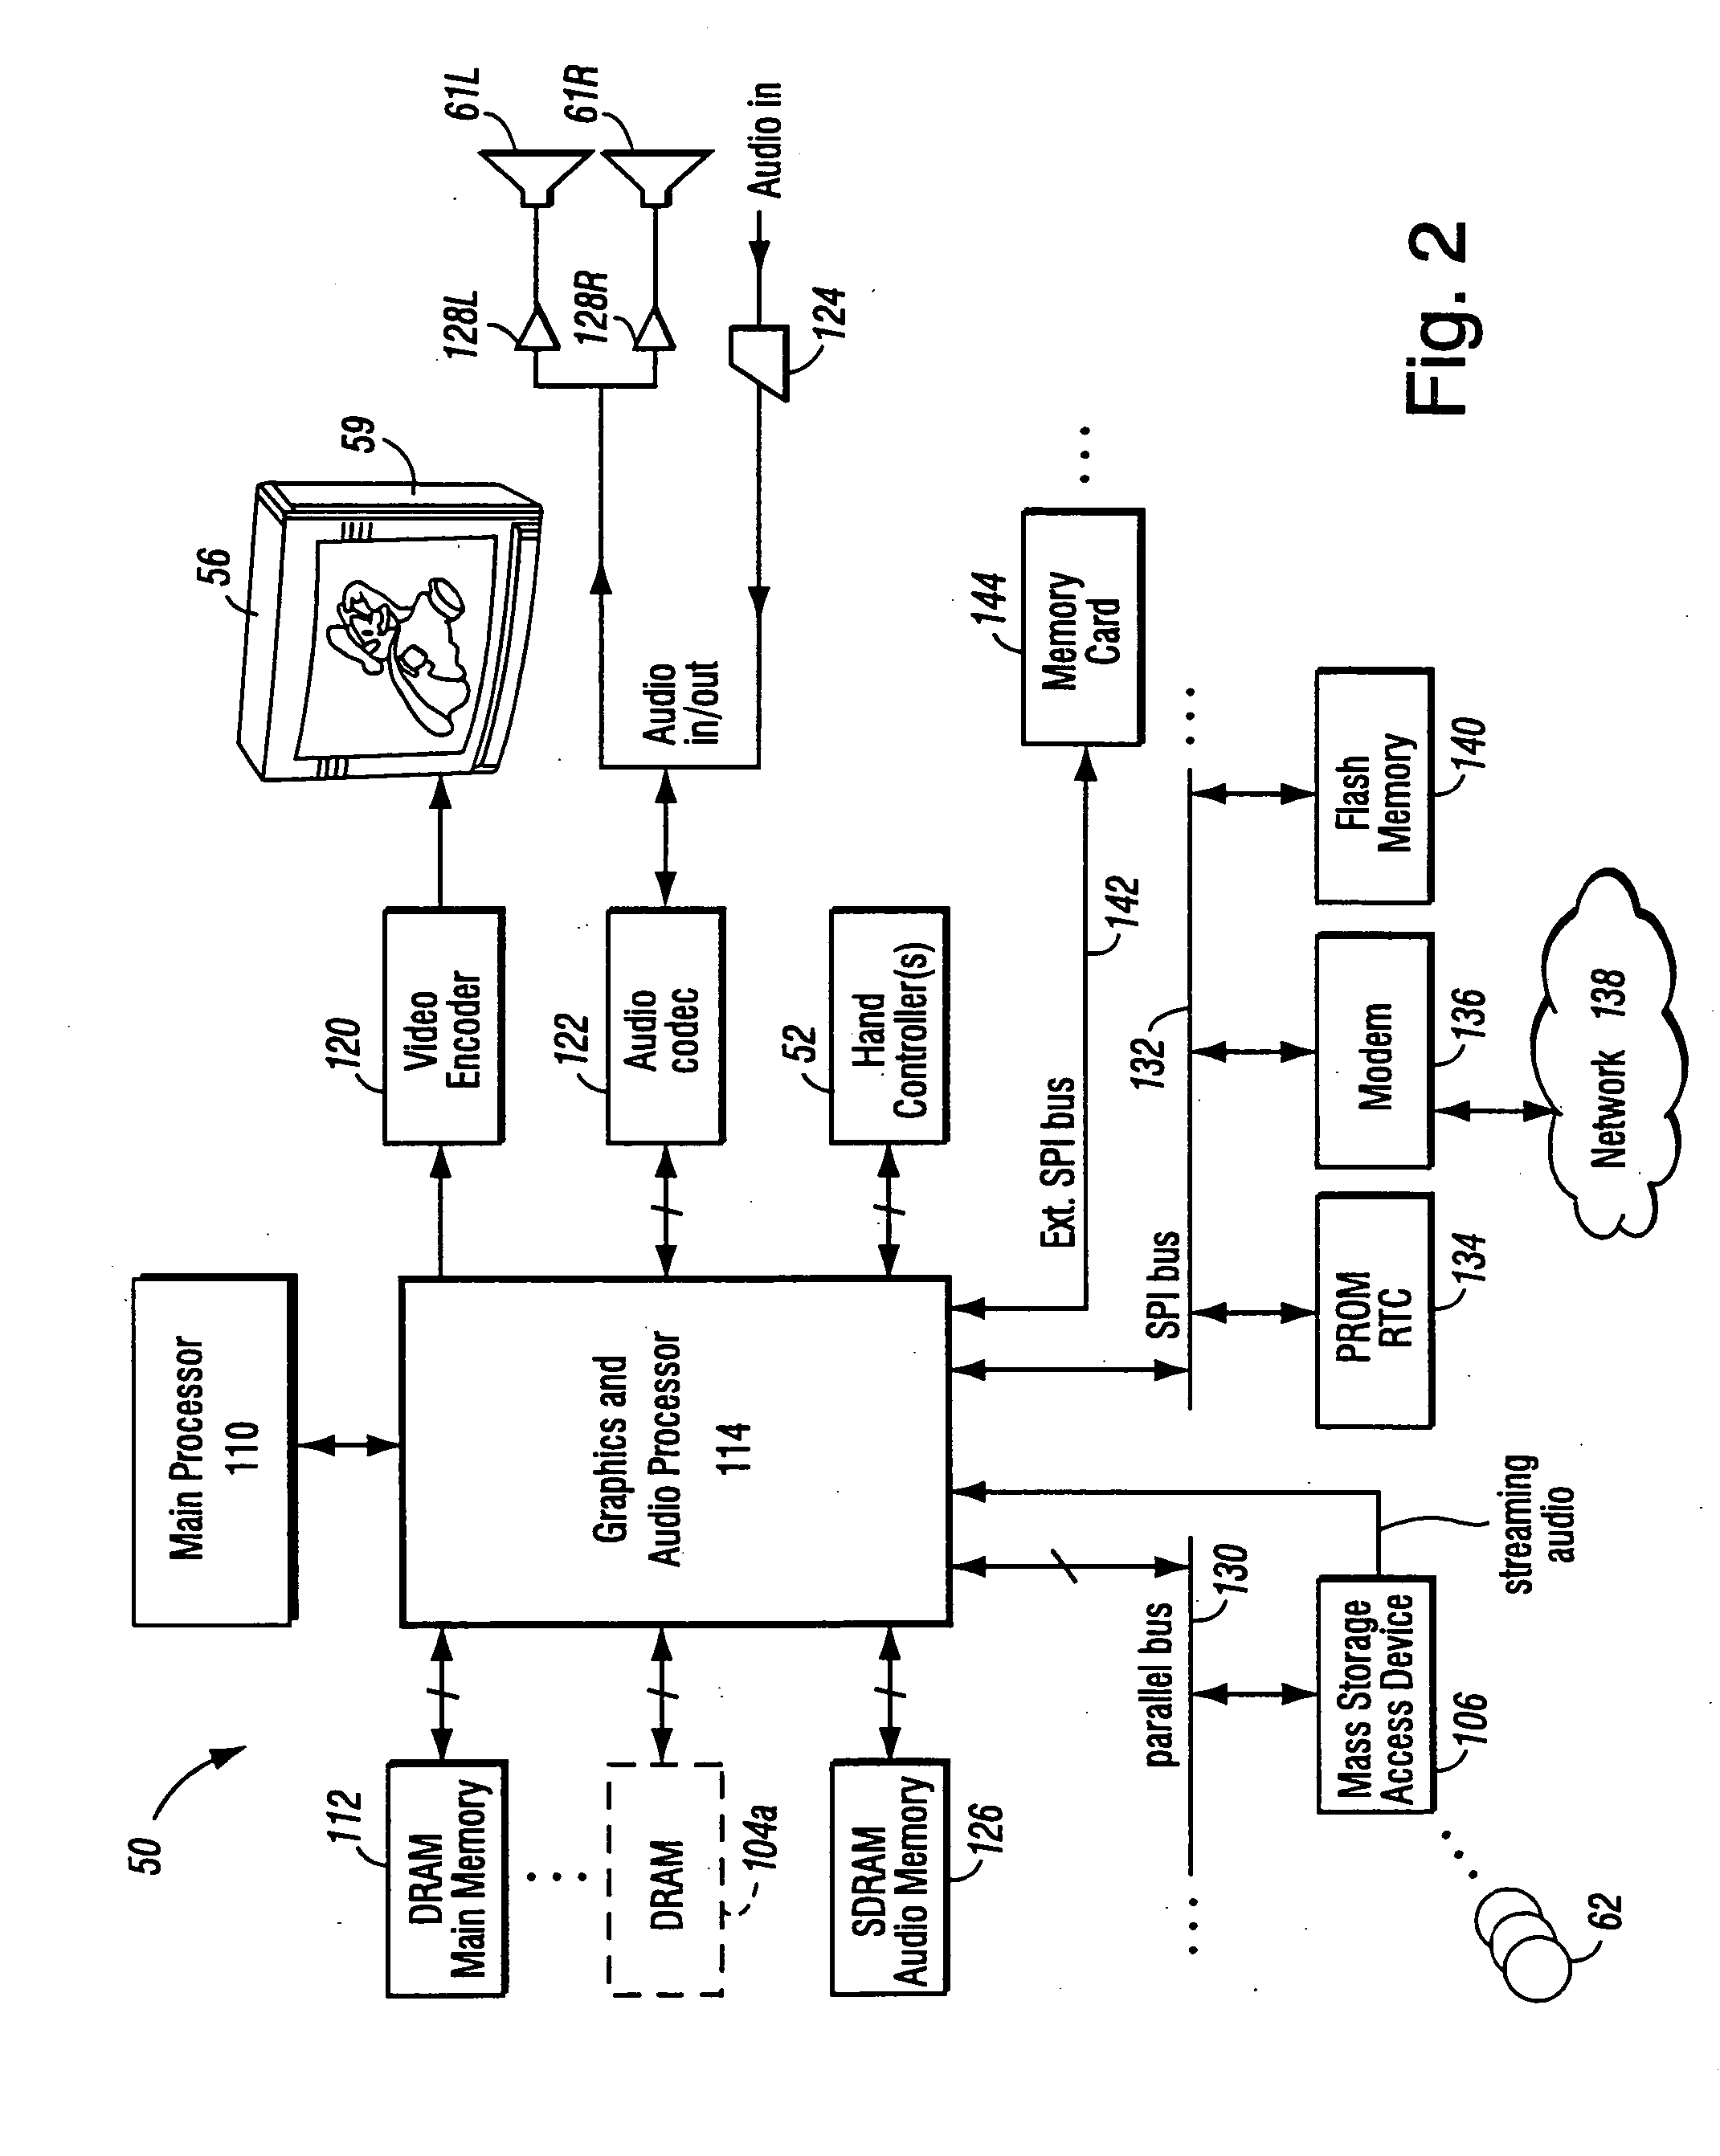 Method and apparatus for efficient generation of texture coordinate displacements for implementing emboss-style bump mapping in a graphics rendering system